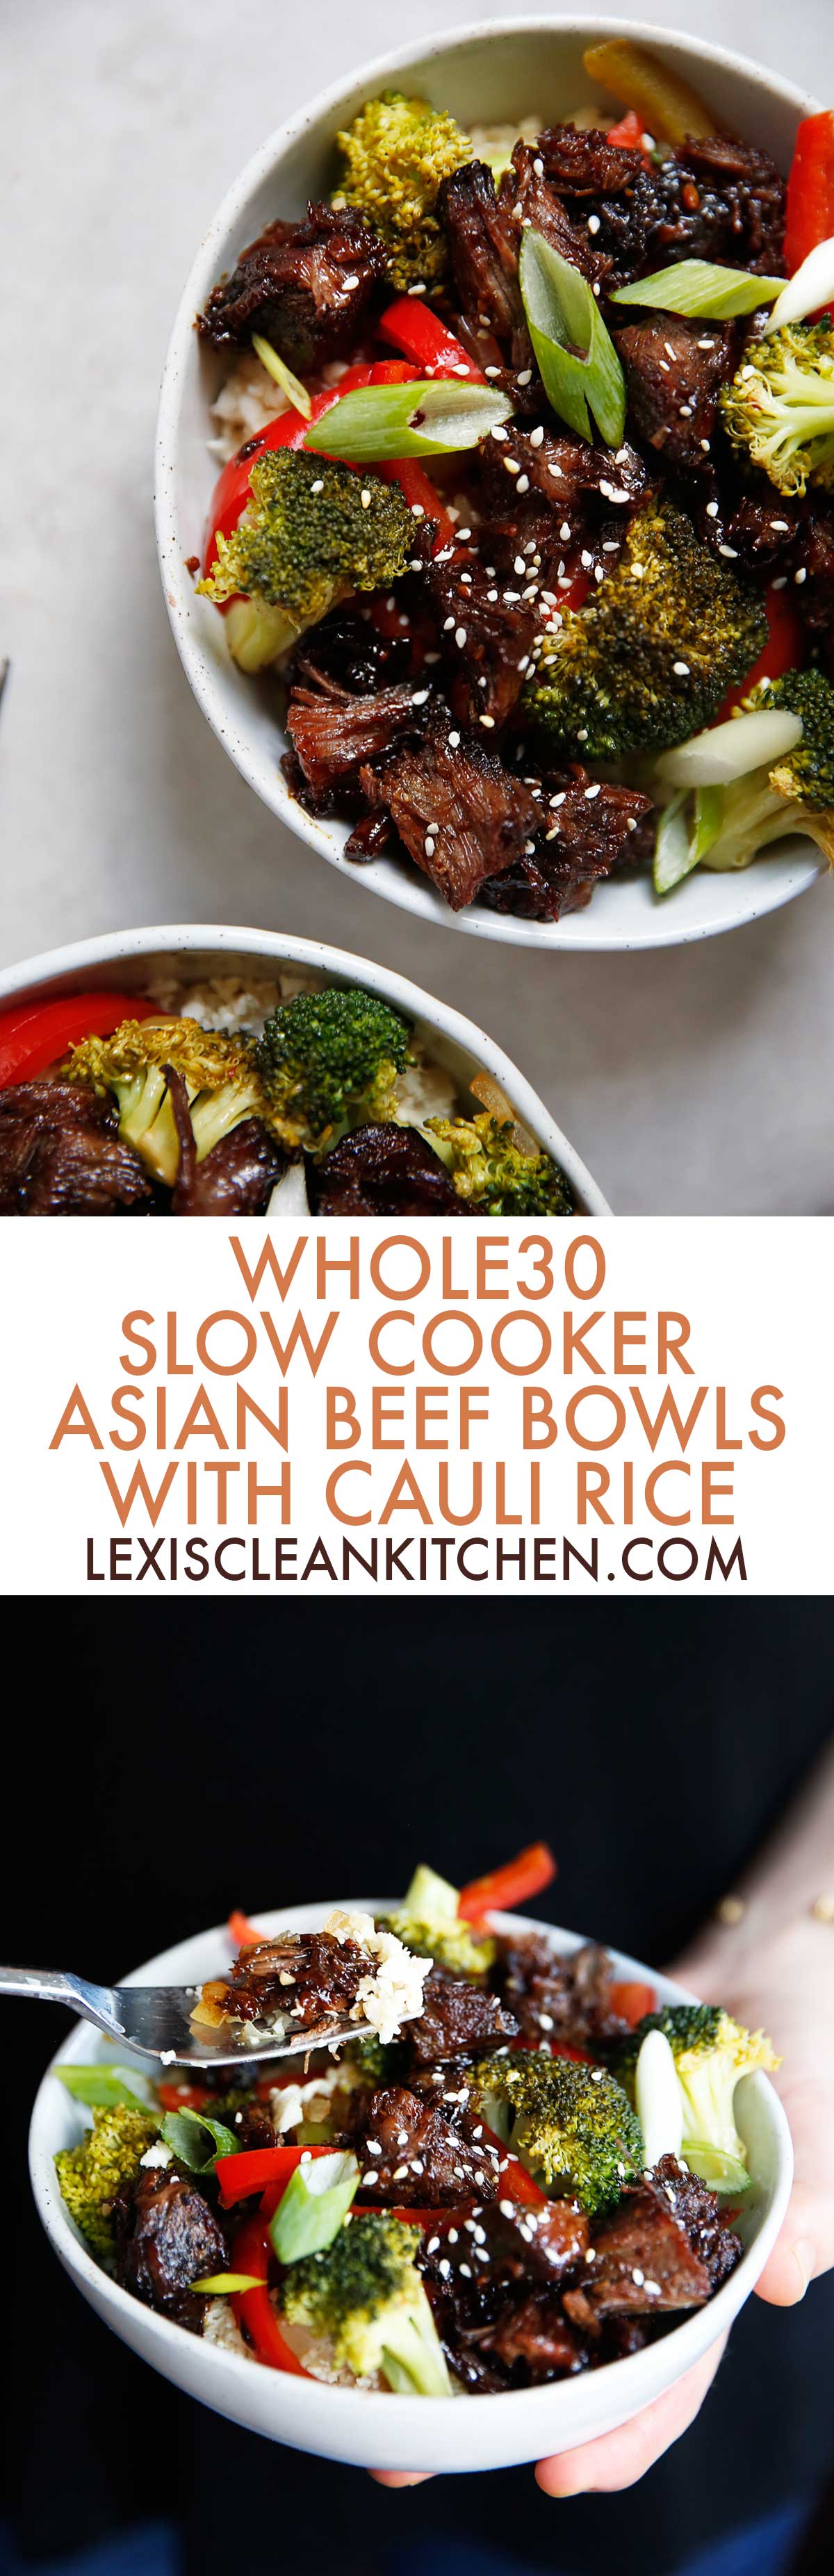 Slow Cooker Asian Beef Bowls [low-carb, grain-free, dairy-free] | Lexi's Clean Kitchen